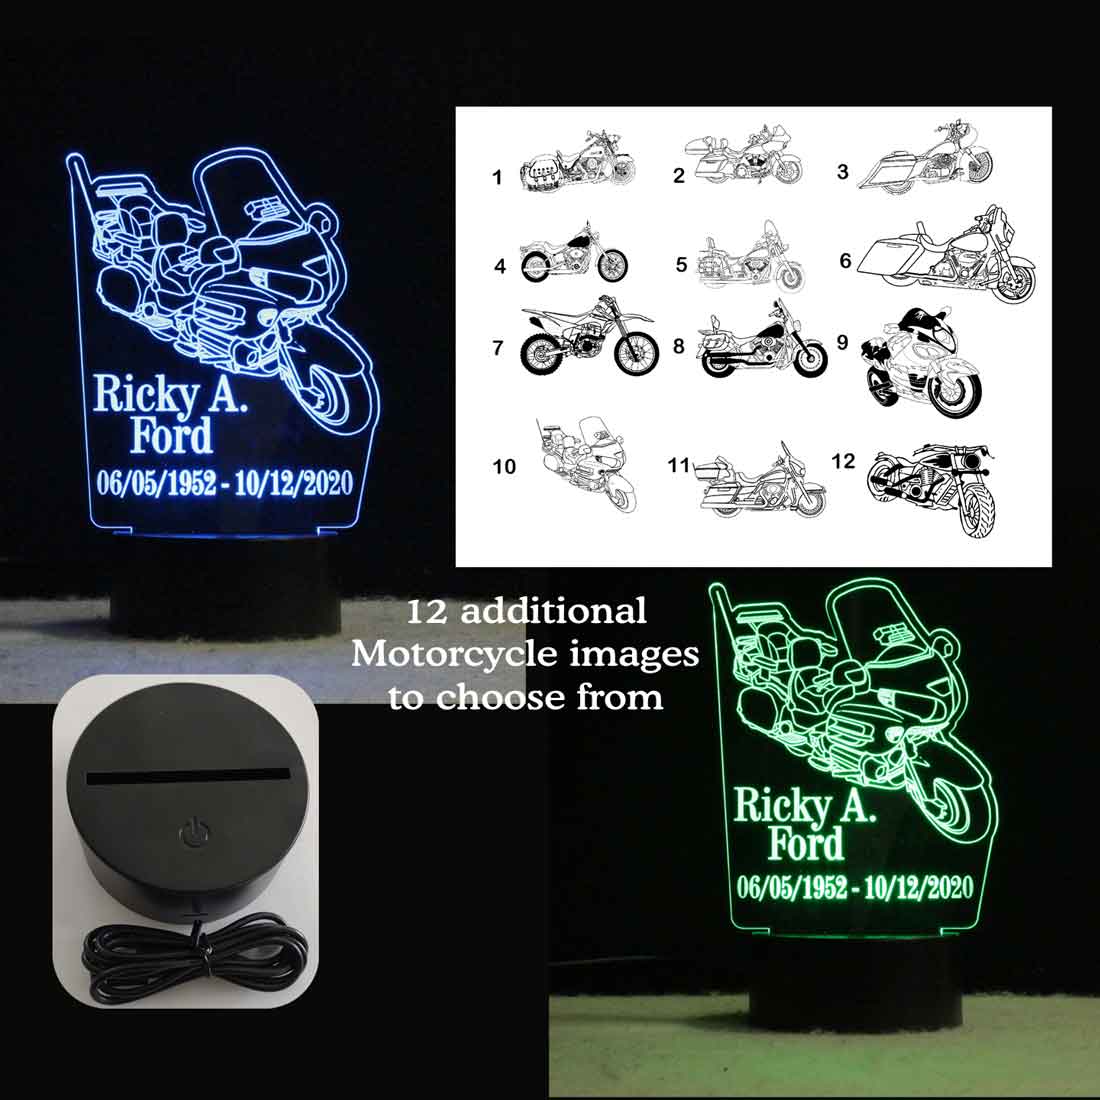 Personalized Motorcycle Table Top night light  USB/battery/110V/110V/240V battery operated Motorcycle night light